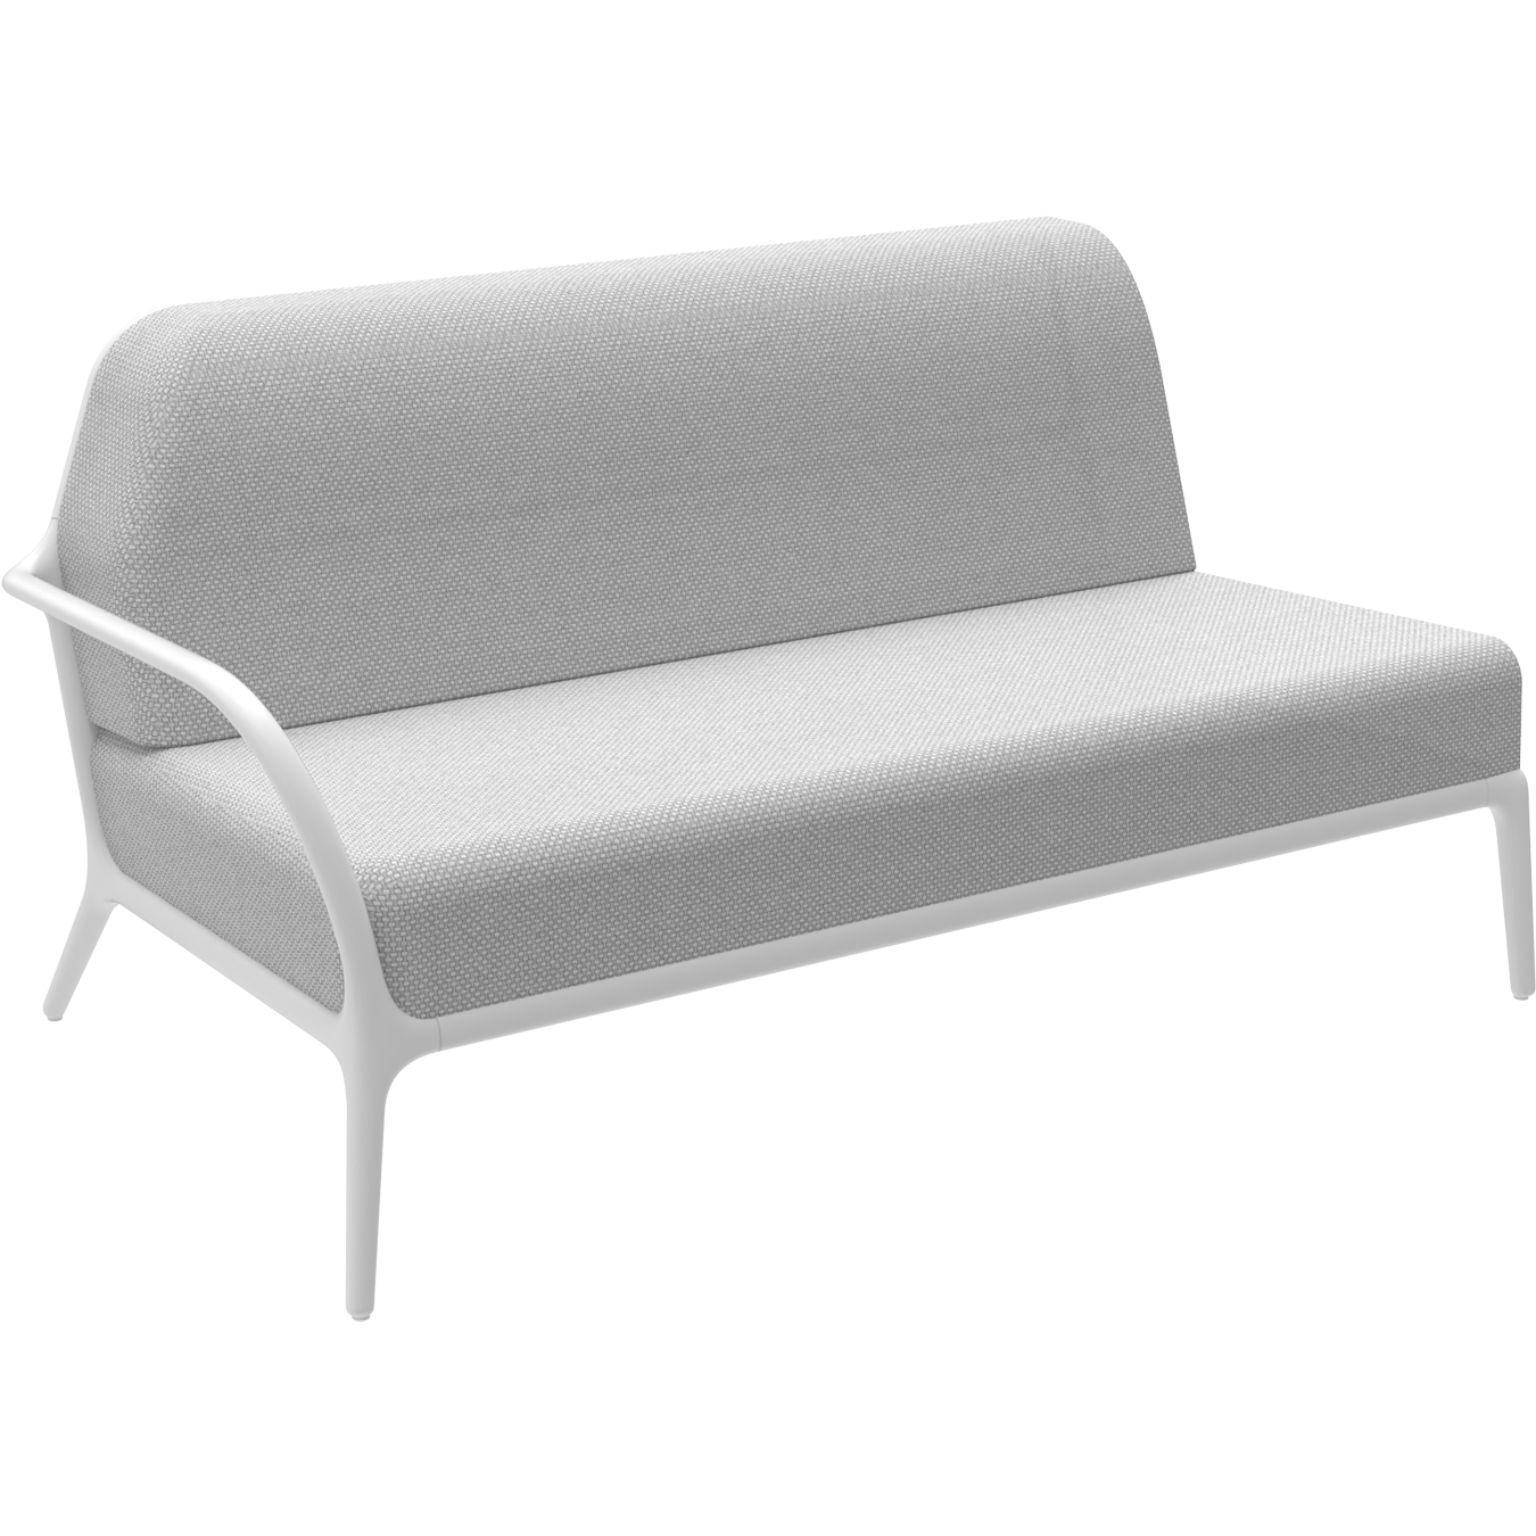 Xaloc Right 160 white modular sofa by Mowee.
Dimensions: D100 x W160 x H81 cm (Seat Height 42 cm)
Material: Aluminium, Textile
Weight: 37 kg
Also Available in different colours and finishes.

 Xaloc synthesizes the lines of interior furniture